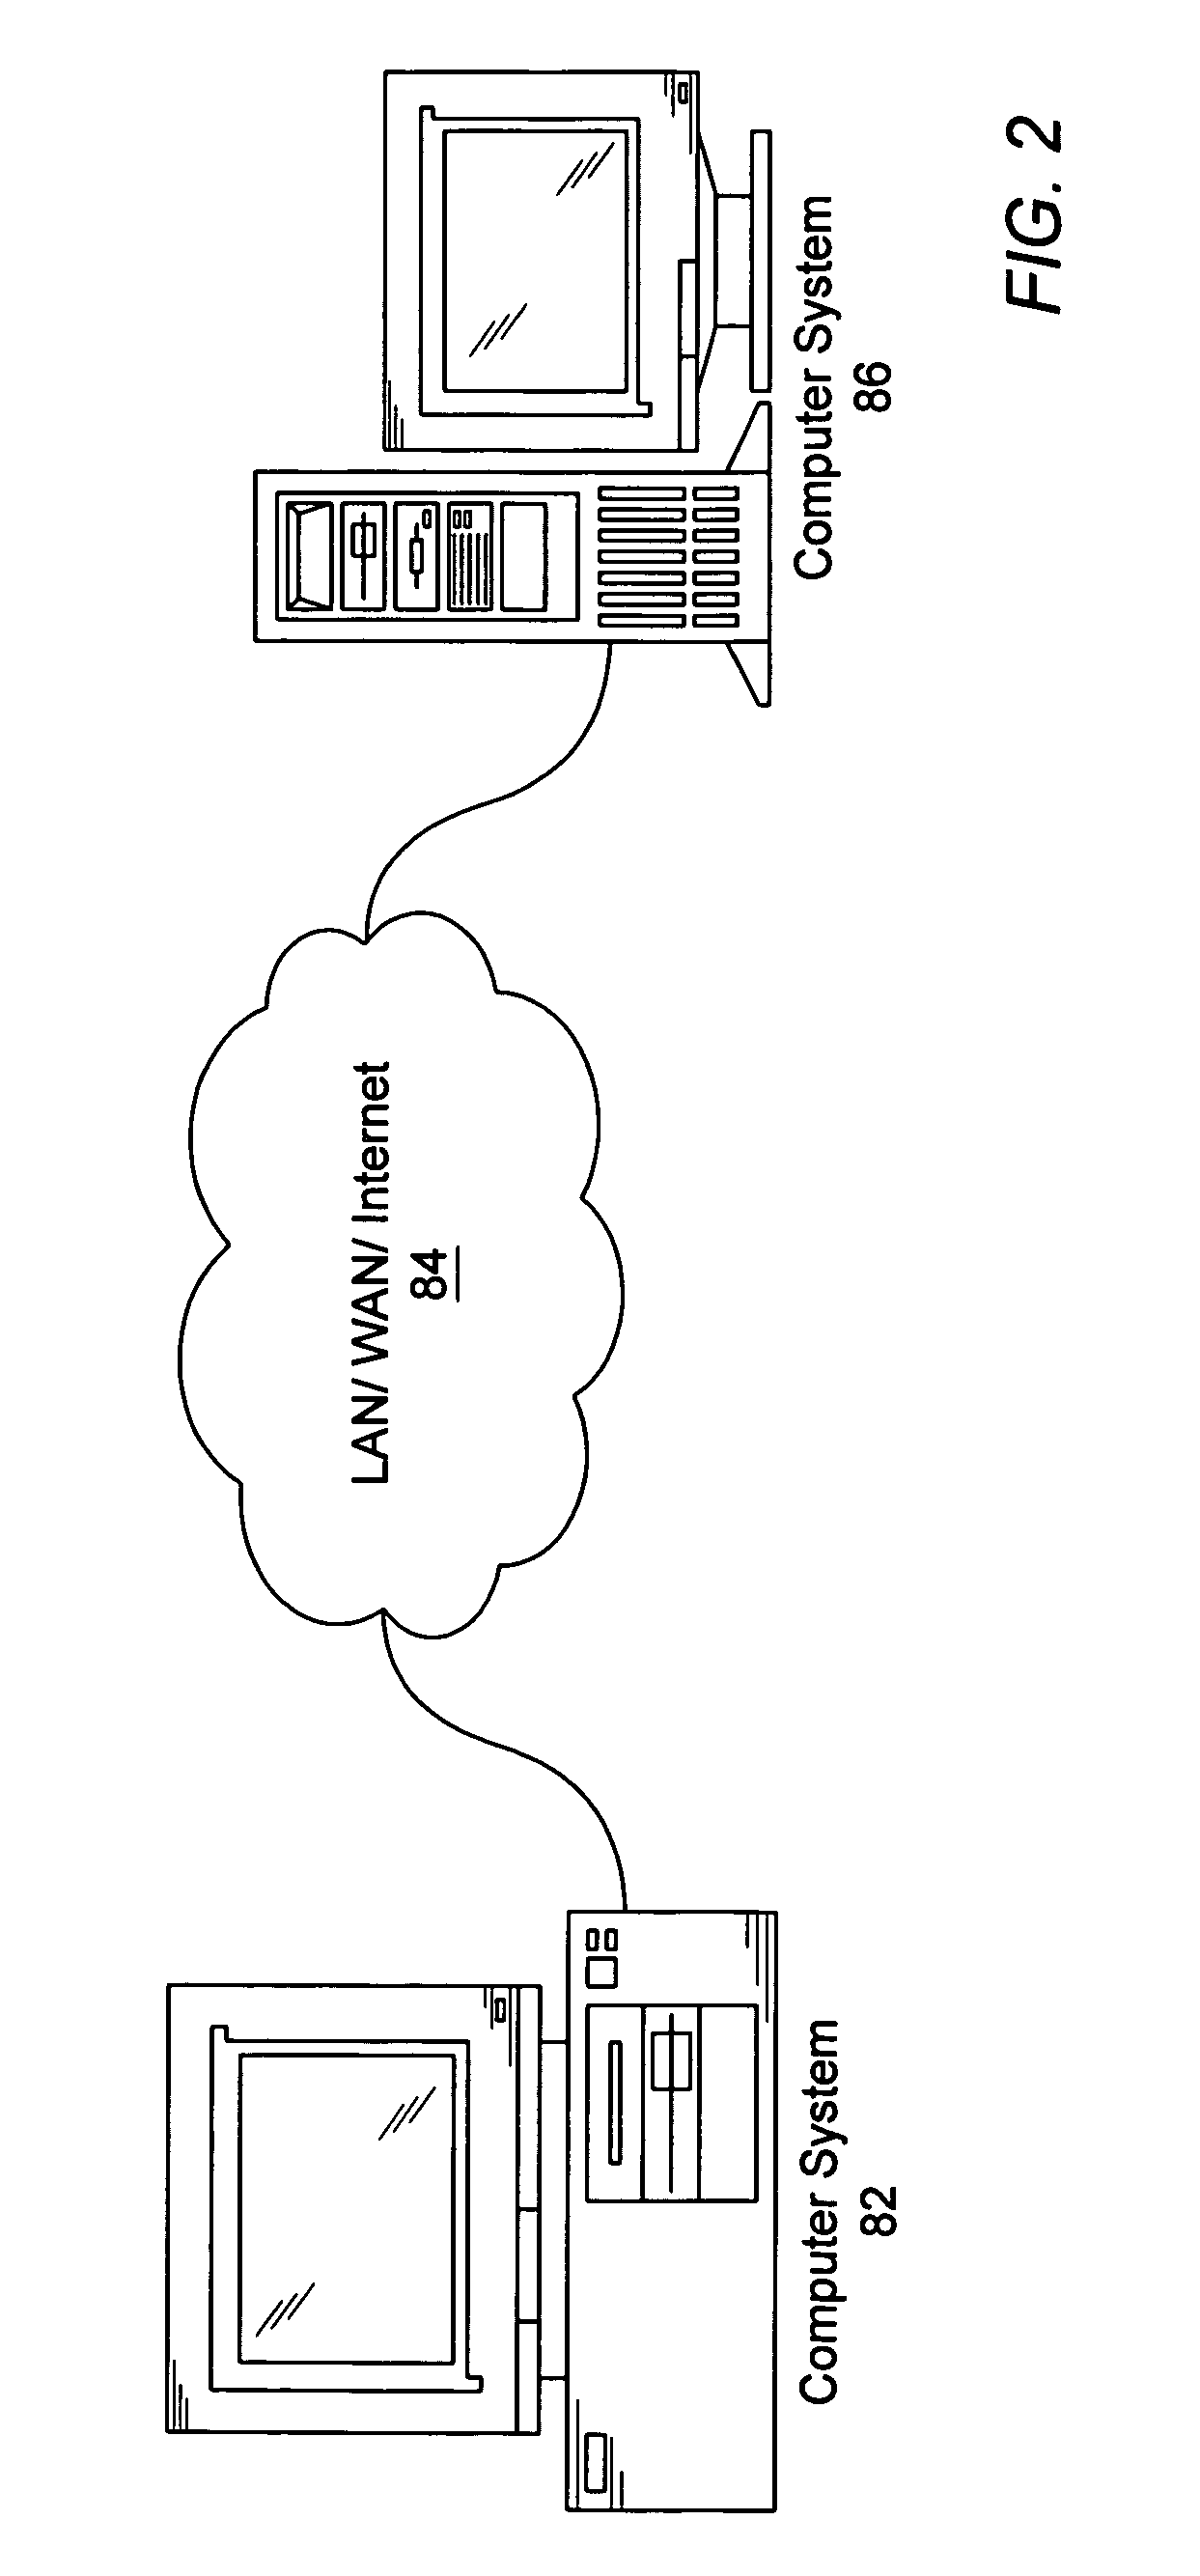 System and method for automatically generating a graphical program in response to a state diagram